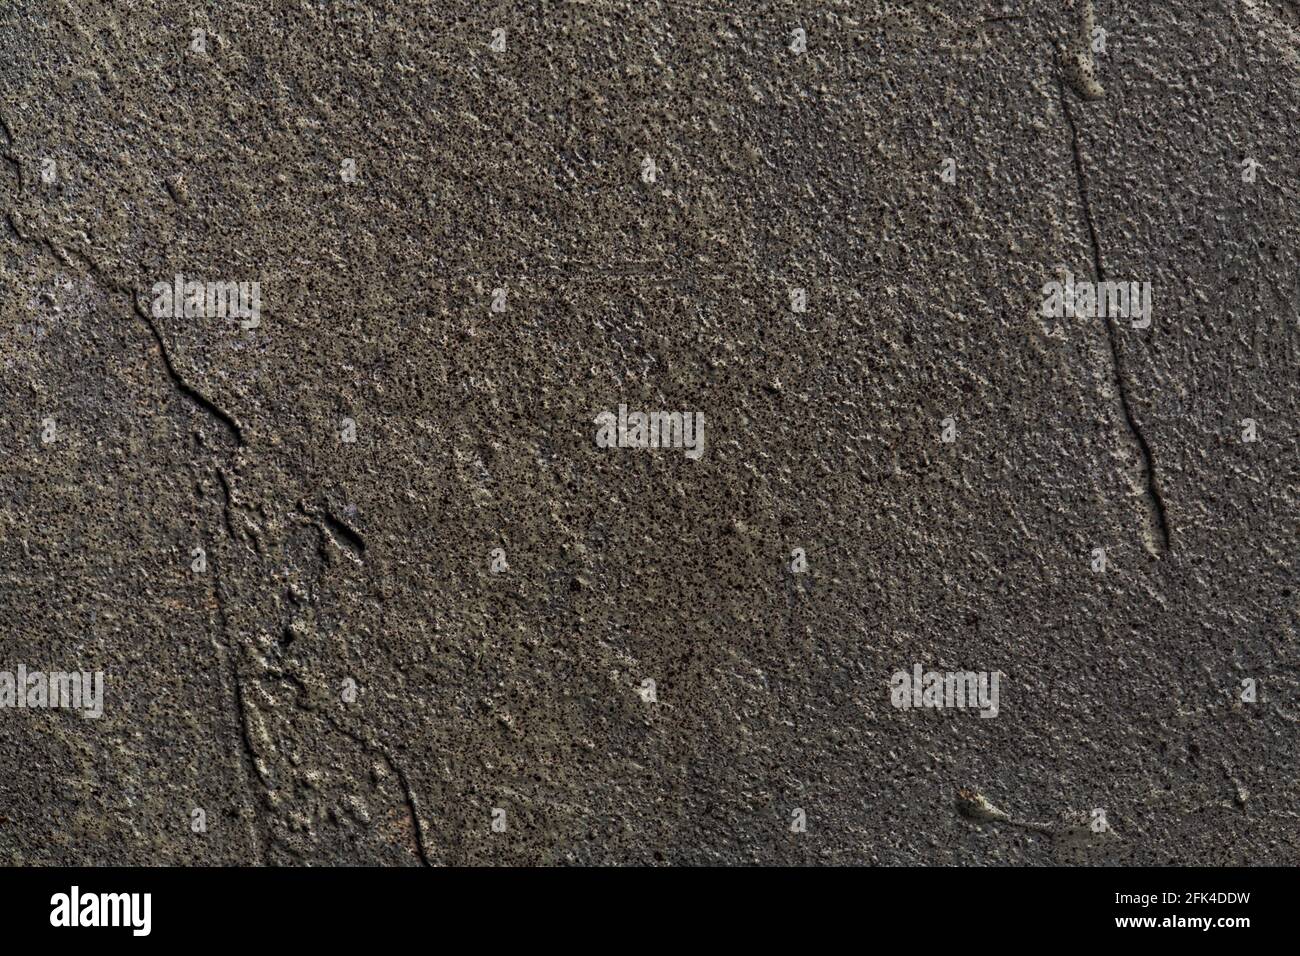 Gray cement or concrete background with a clear texture. Stock Photo